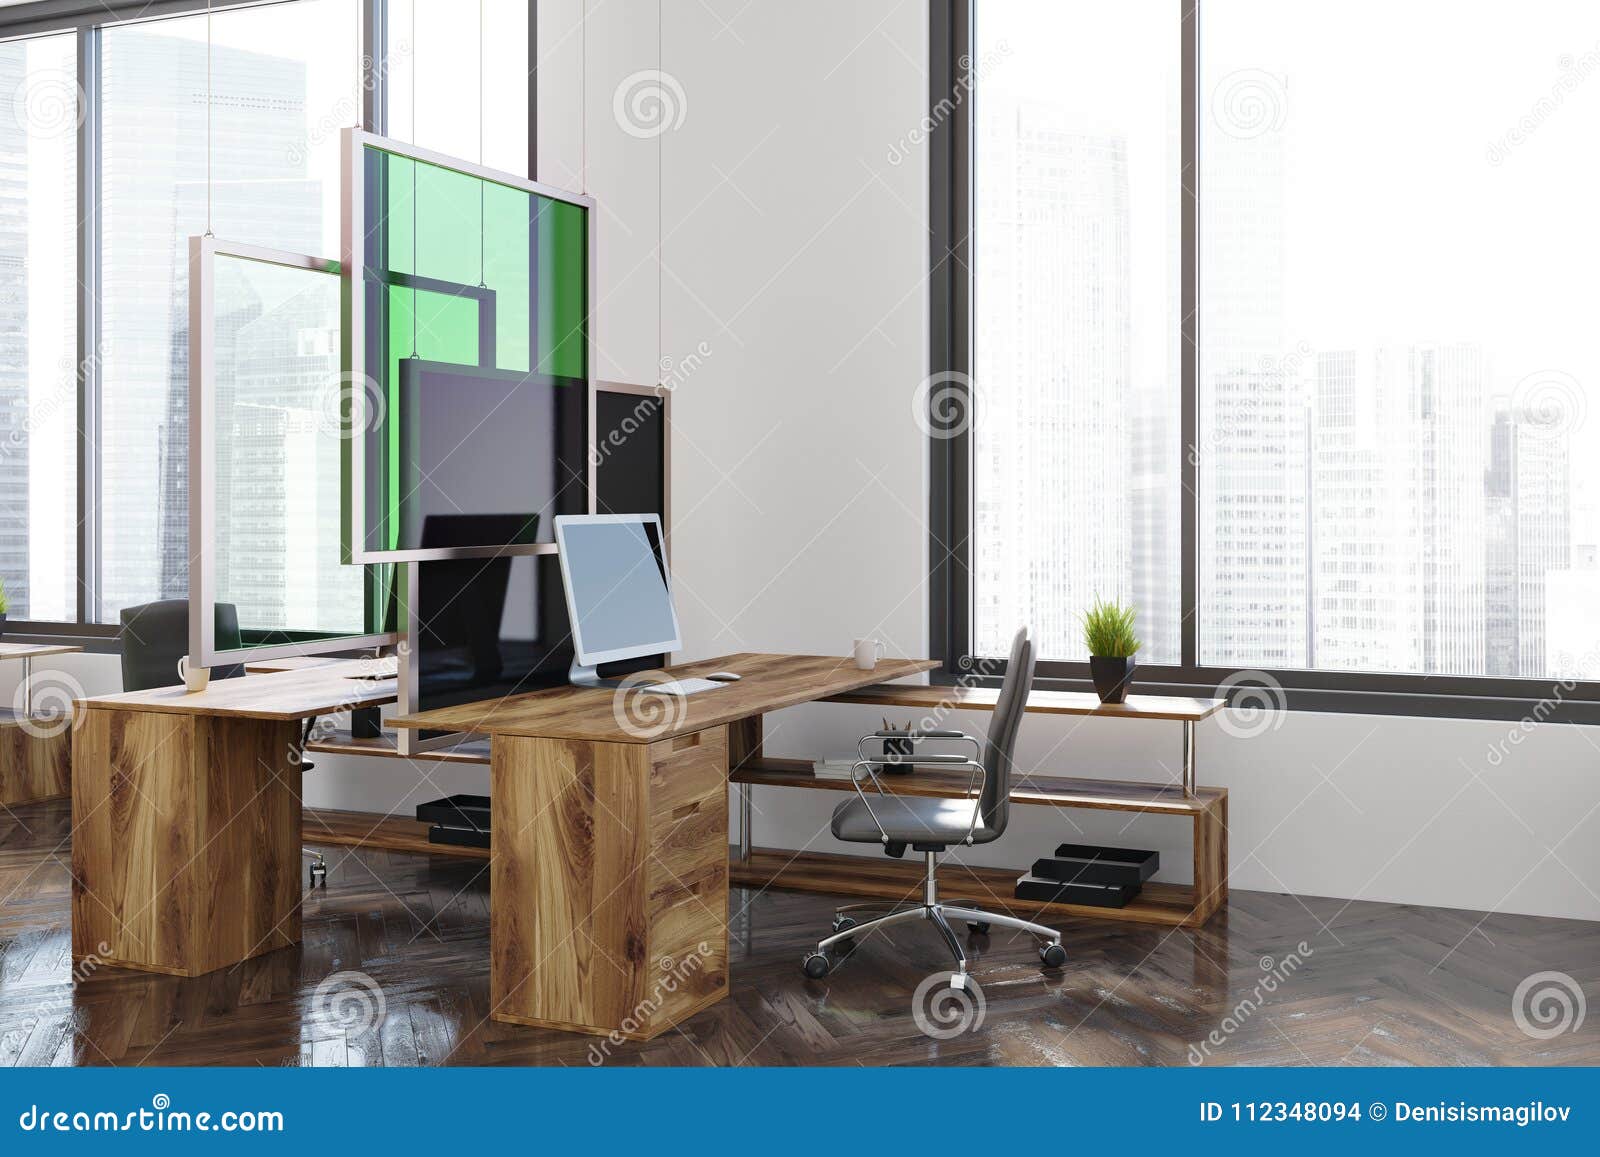 Corner Of A White And Green Office Stock Illustration